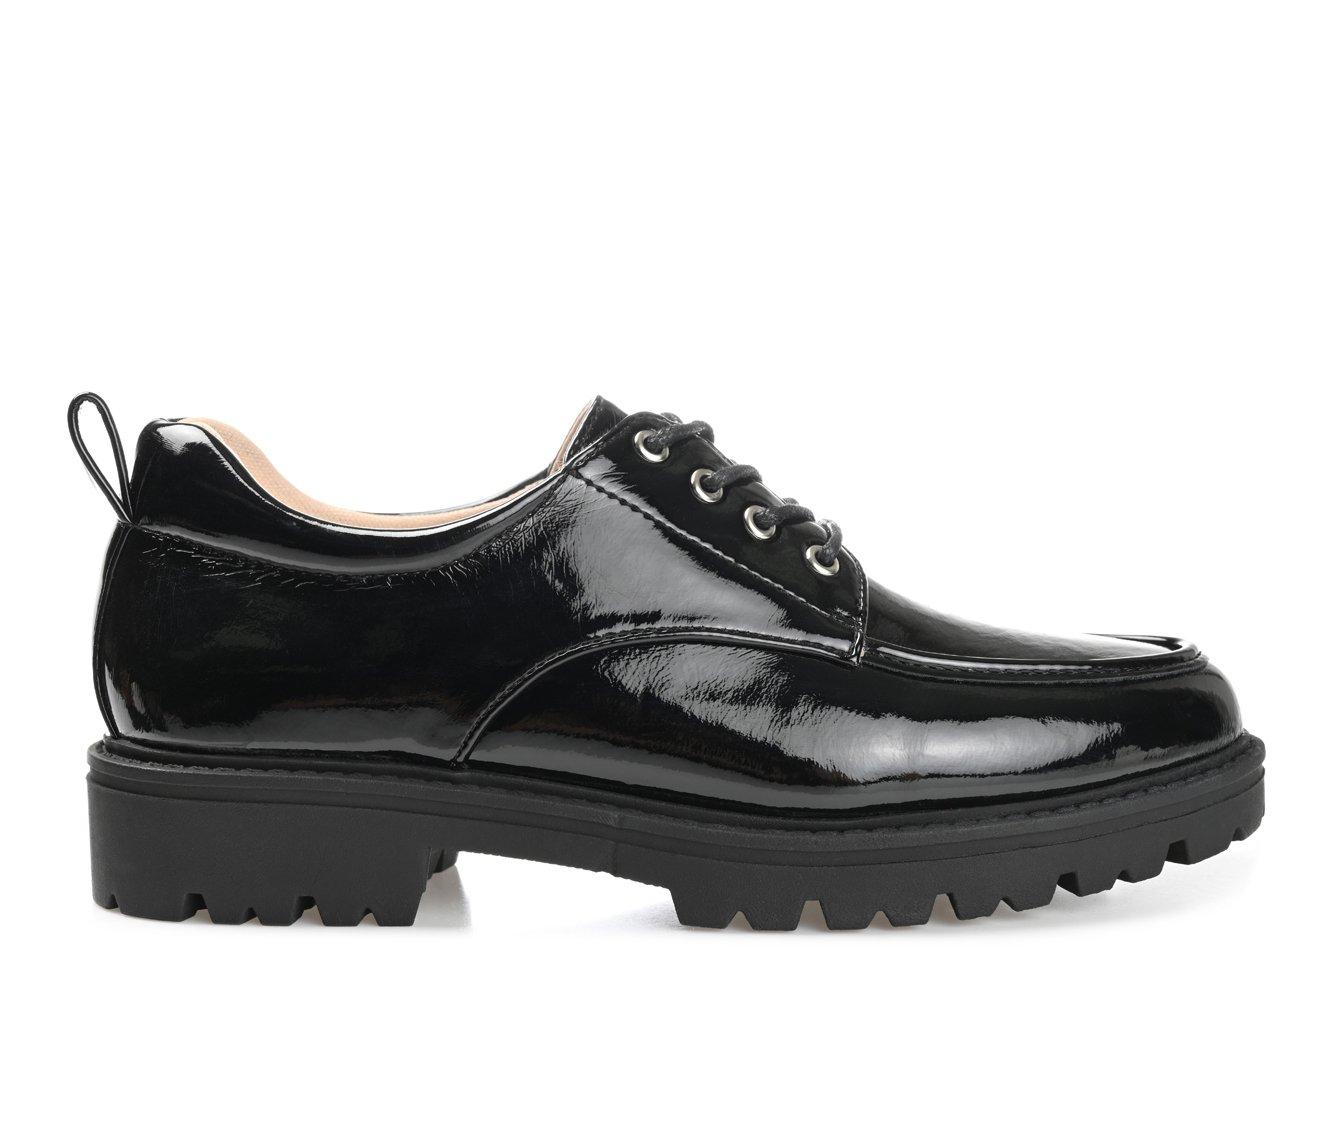 Women's Journee Collection Zina Lugged Oxfords